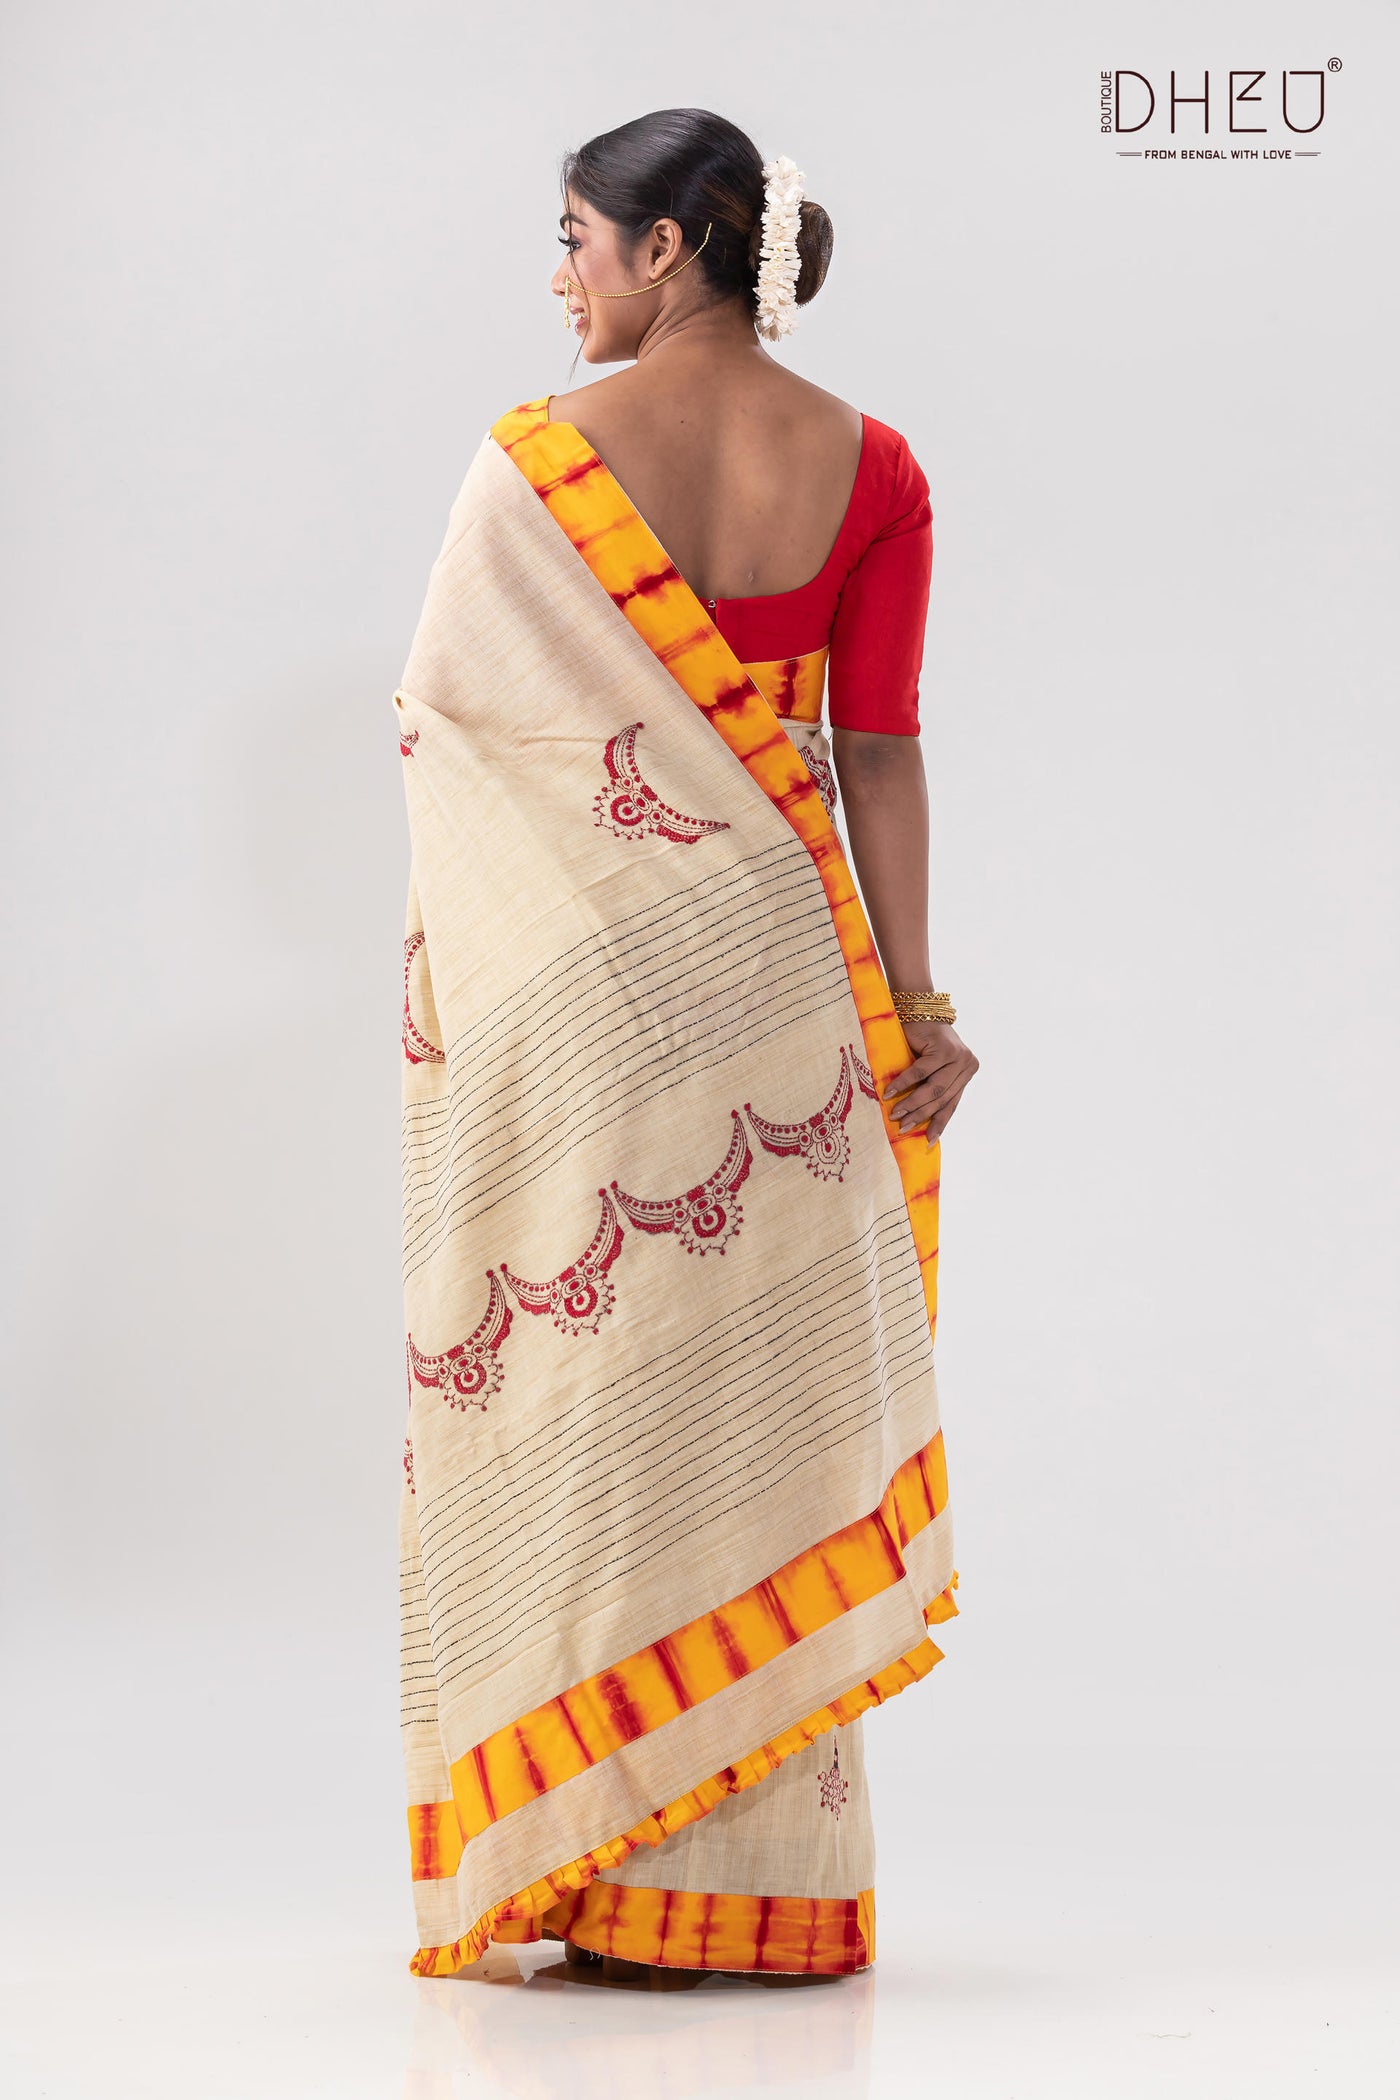 Dheu Exclusive -Hand crafted kantha saree